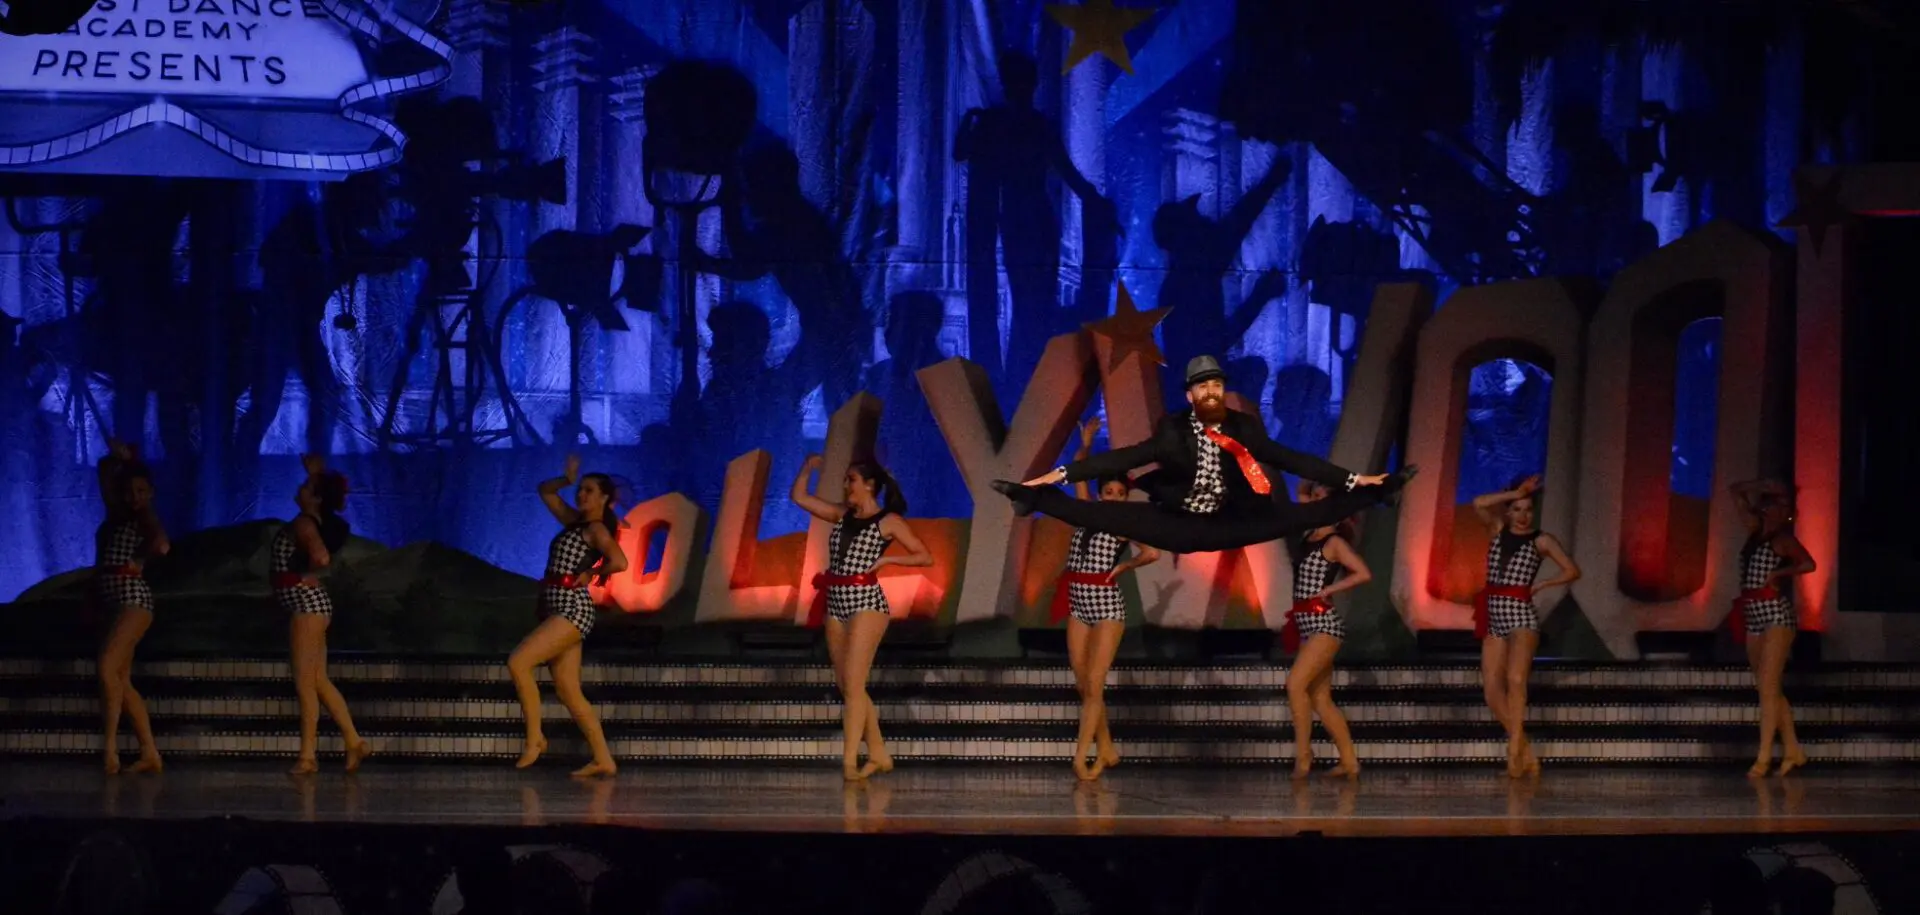 A group of dancers performing on stage in front of a large sign.